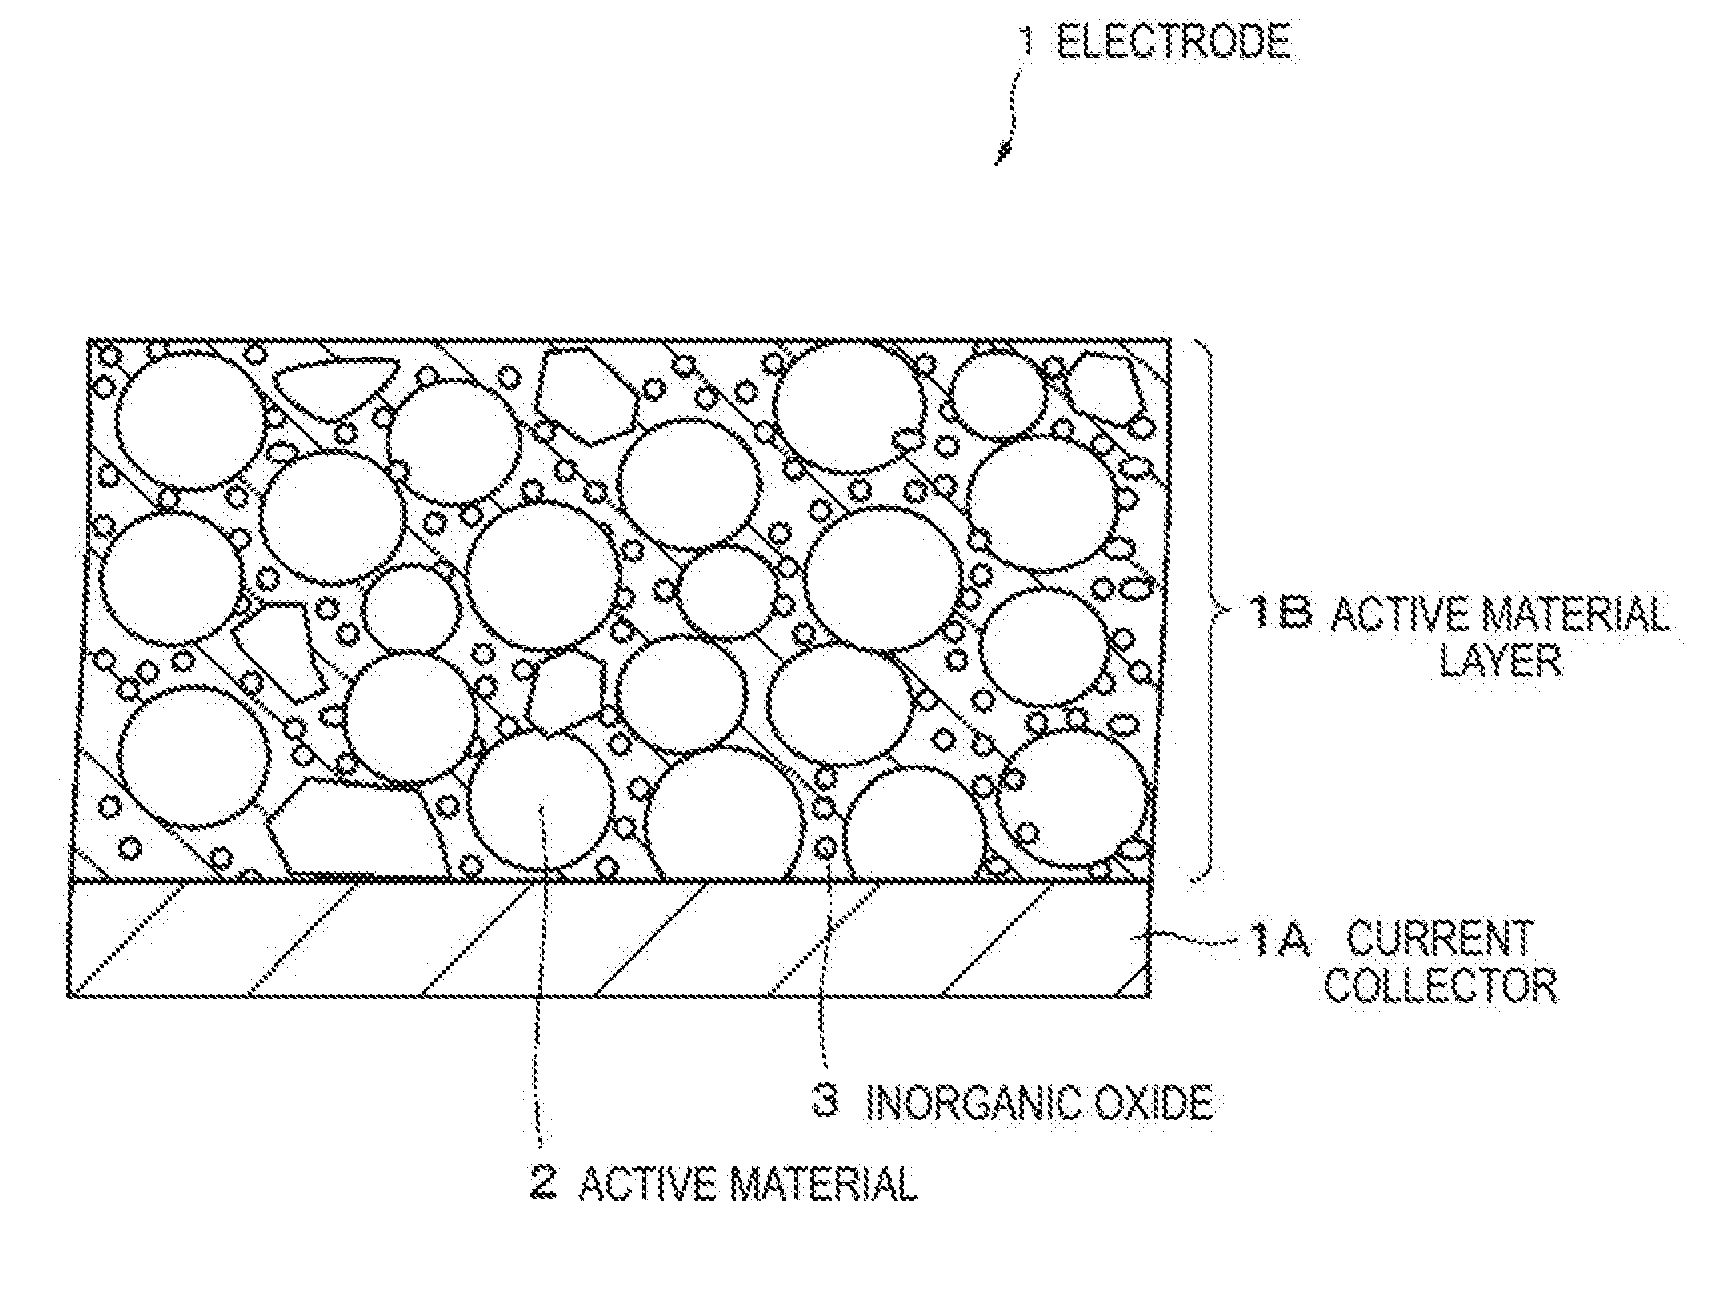 Electrode and battery